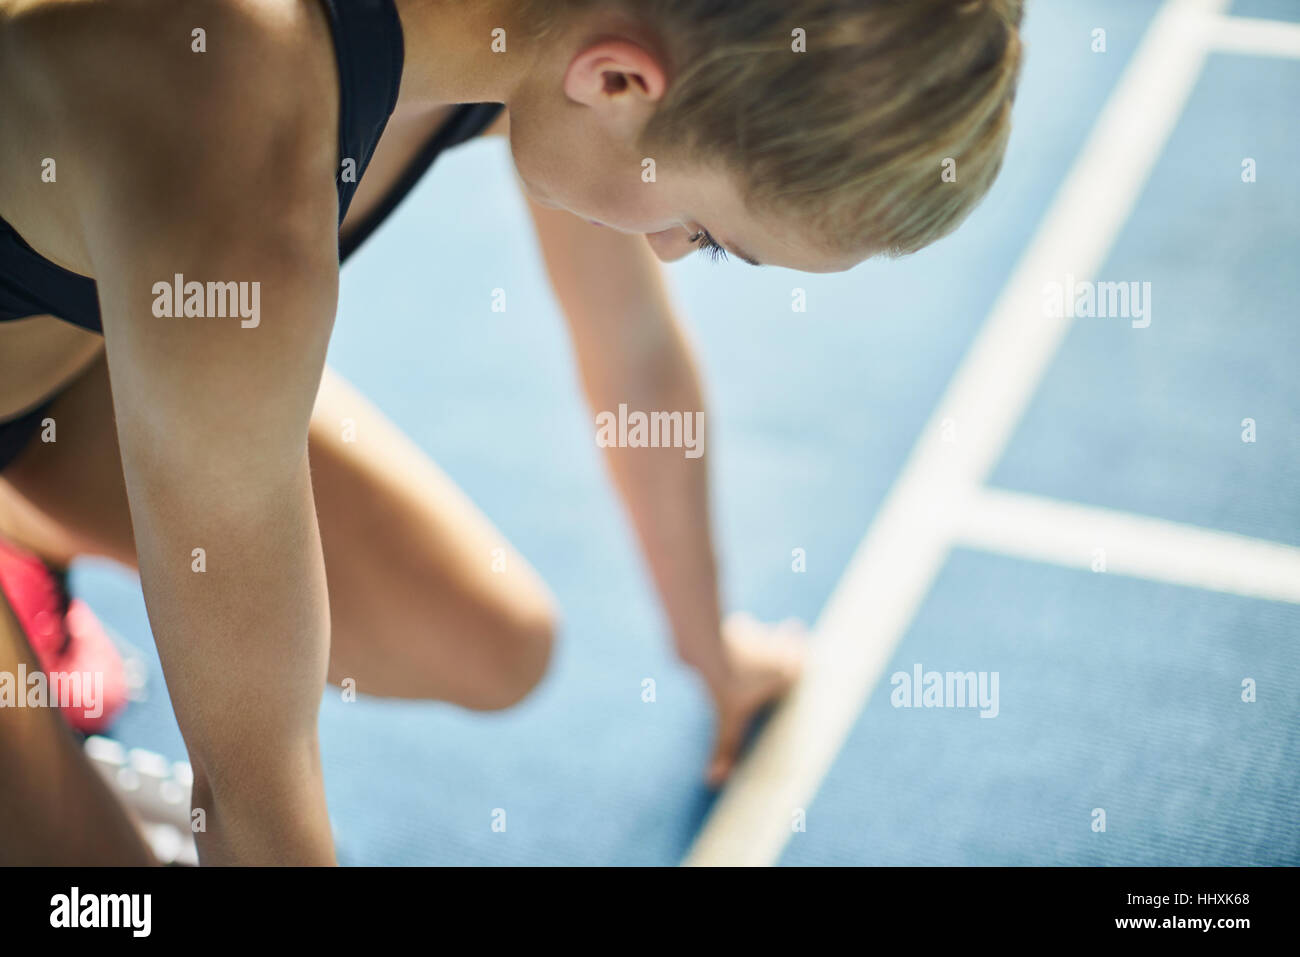 Focused female runner ready at starting block on sports track Stock Photo